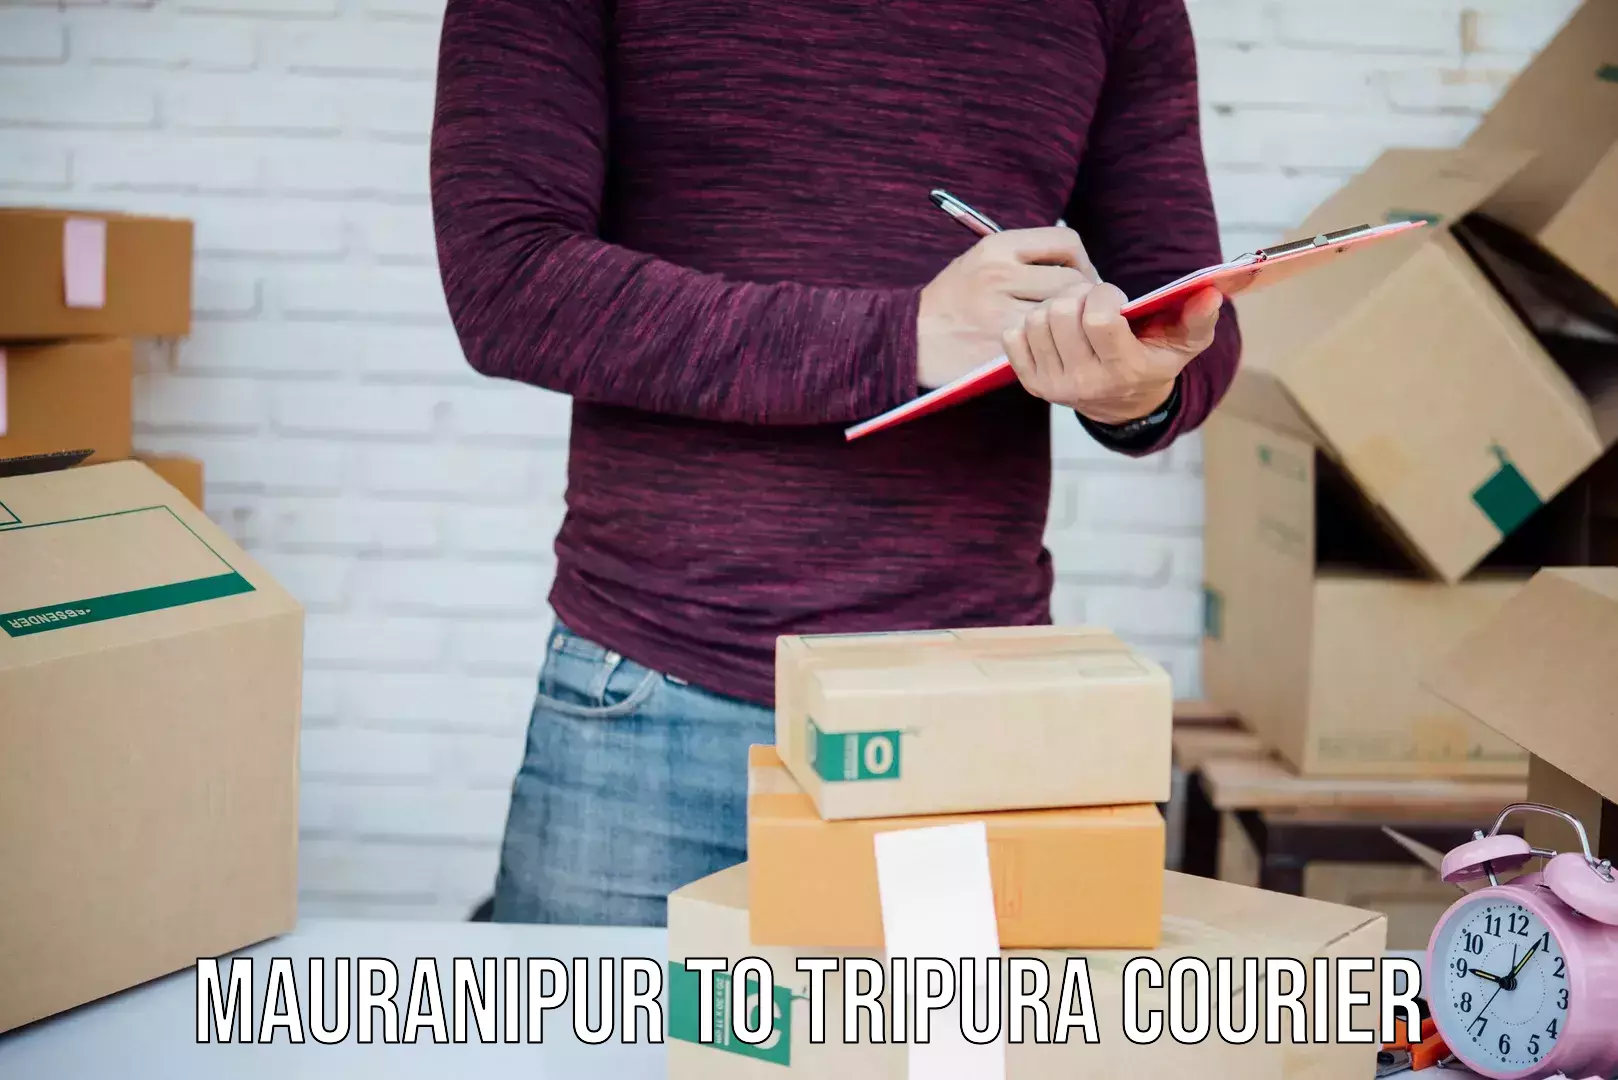 High-quality delivery services Mauranipur to Udaipur Tripura